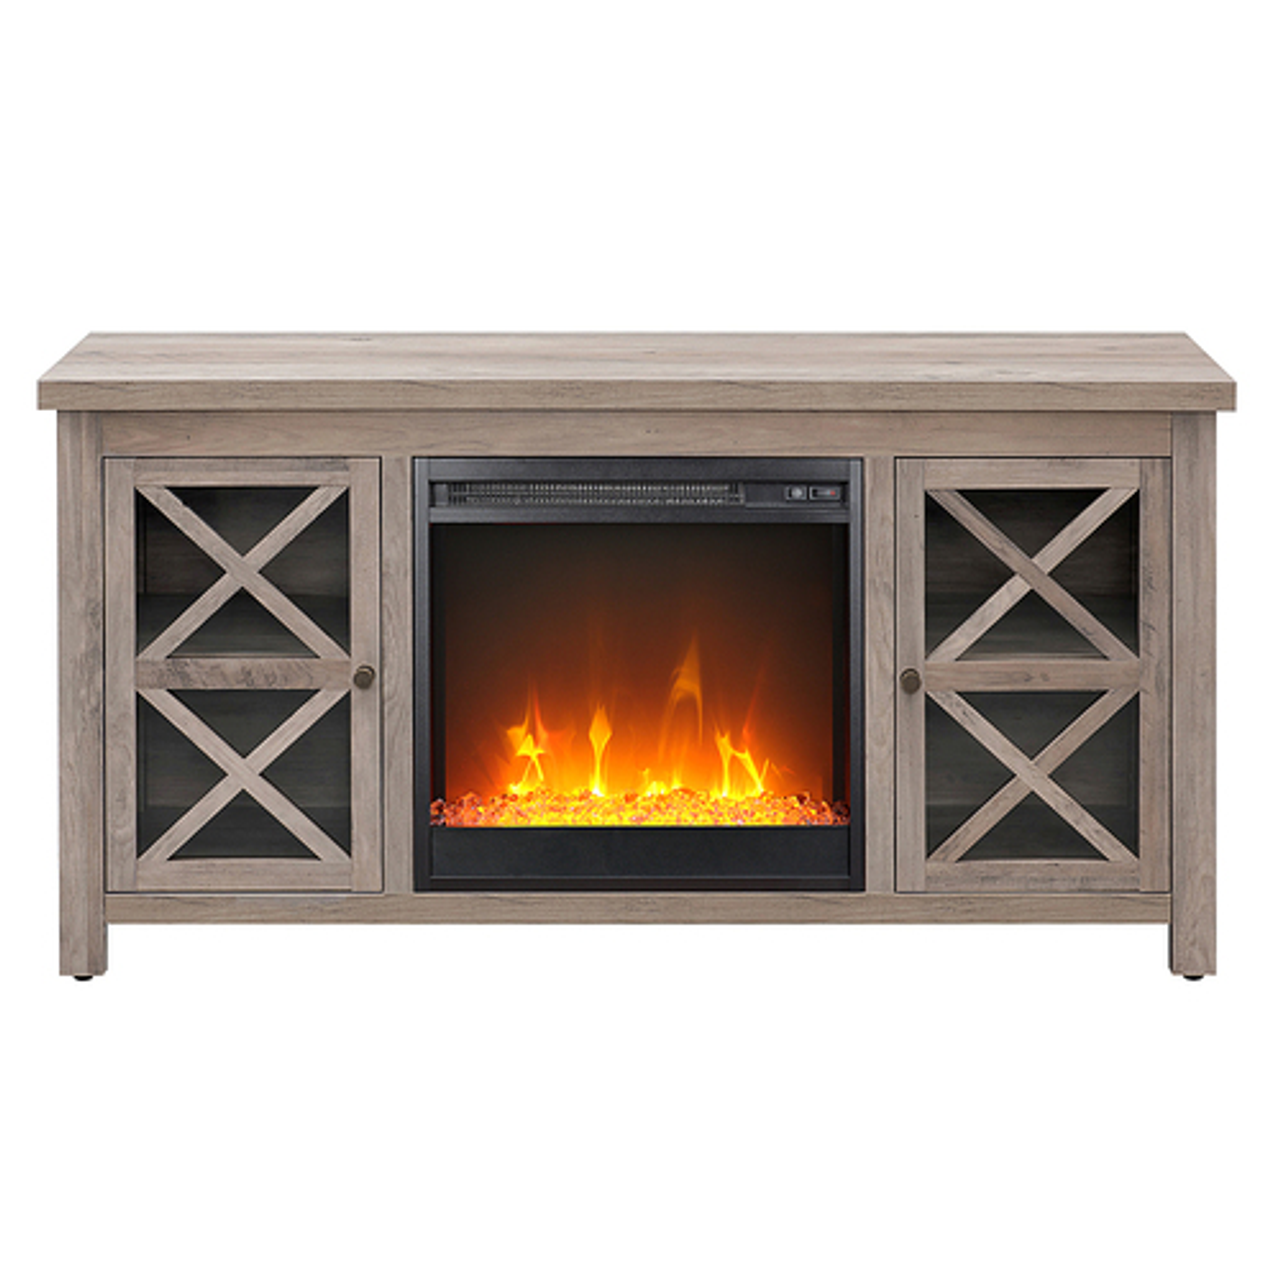 Camden&Wells - Colton 47.75" TV Stand with Crystal Fireplace - Gray Oak